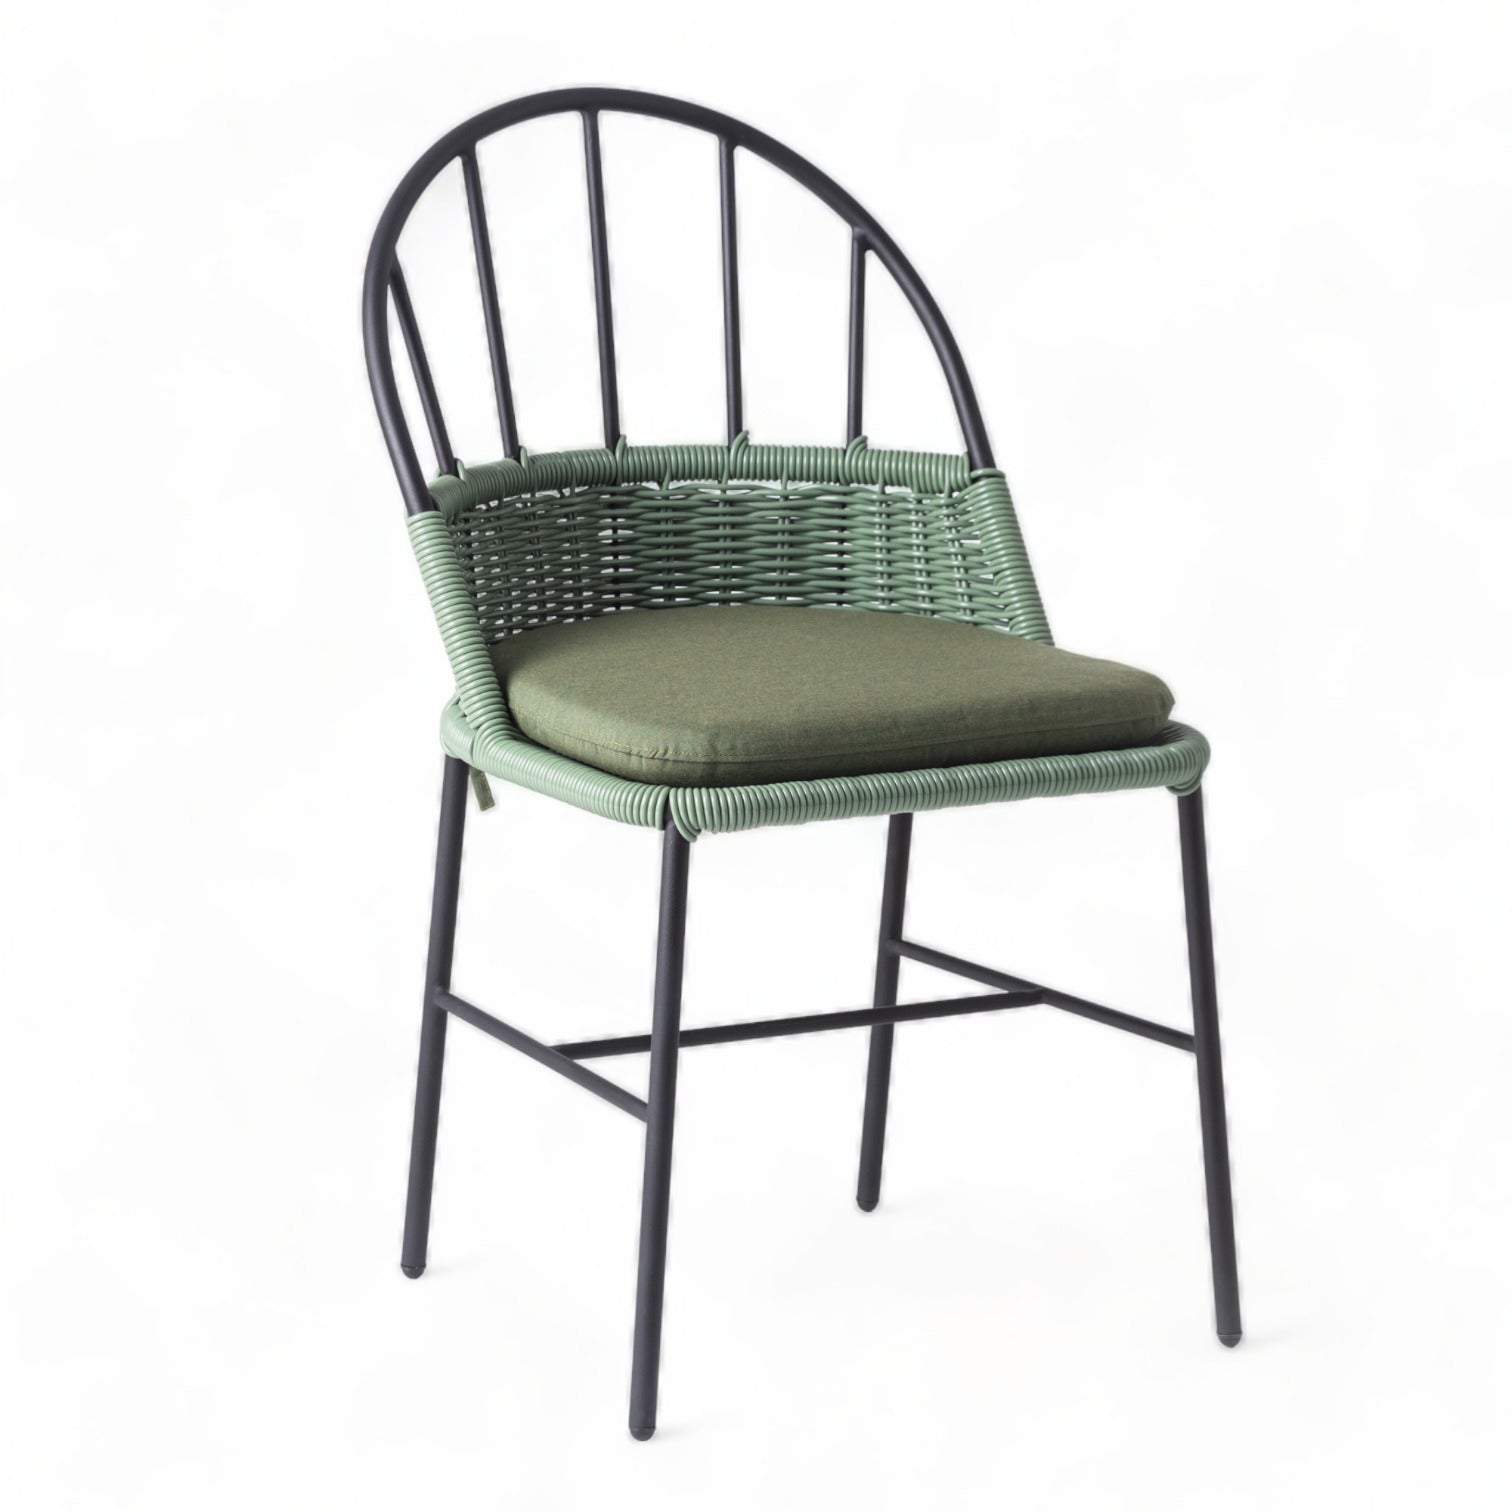 Olivo 1730 Dining Chair